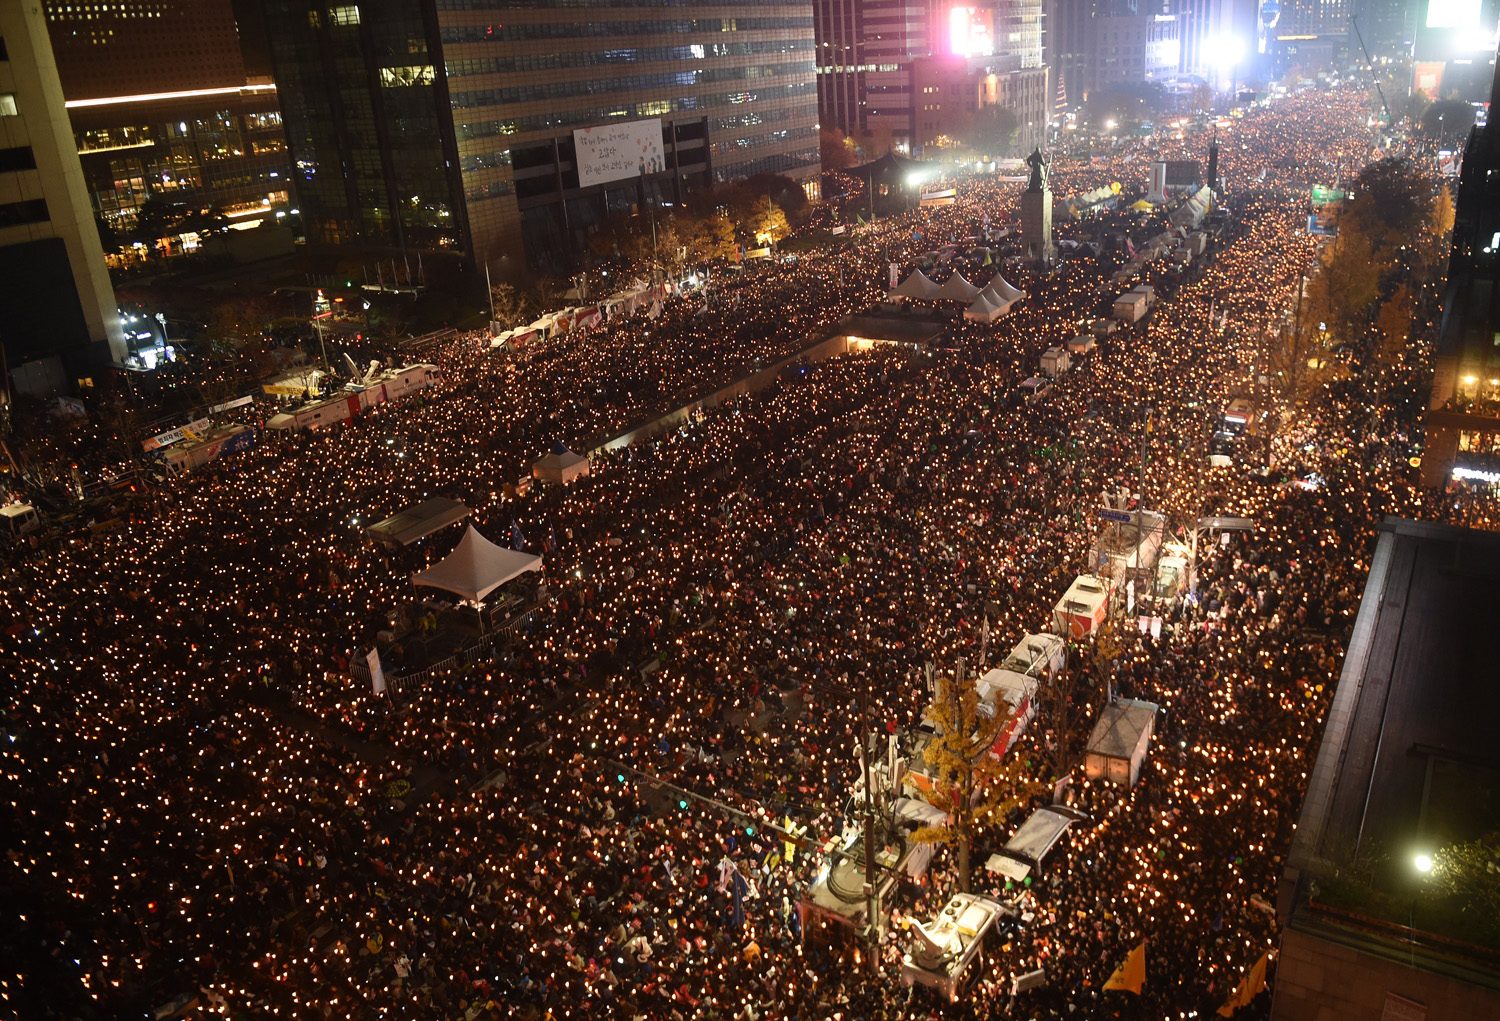 Tens of thousands of protesters hold candles during an anti-government rally in central Seoul on November 19, 2016 aimed at forcing South Korean President Park Geun-Hye to resign over a corruption scandal. Tens of thousands of protestors gathered in Seoul for the fourth in a weekly series of mass protests aimed at forcing President Park Geun-Hye to resign over a corruption scandal. / AFP PHOTO / POOL / JUNG YEON-JE